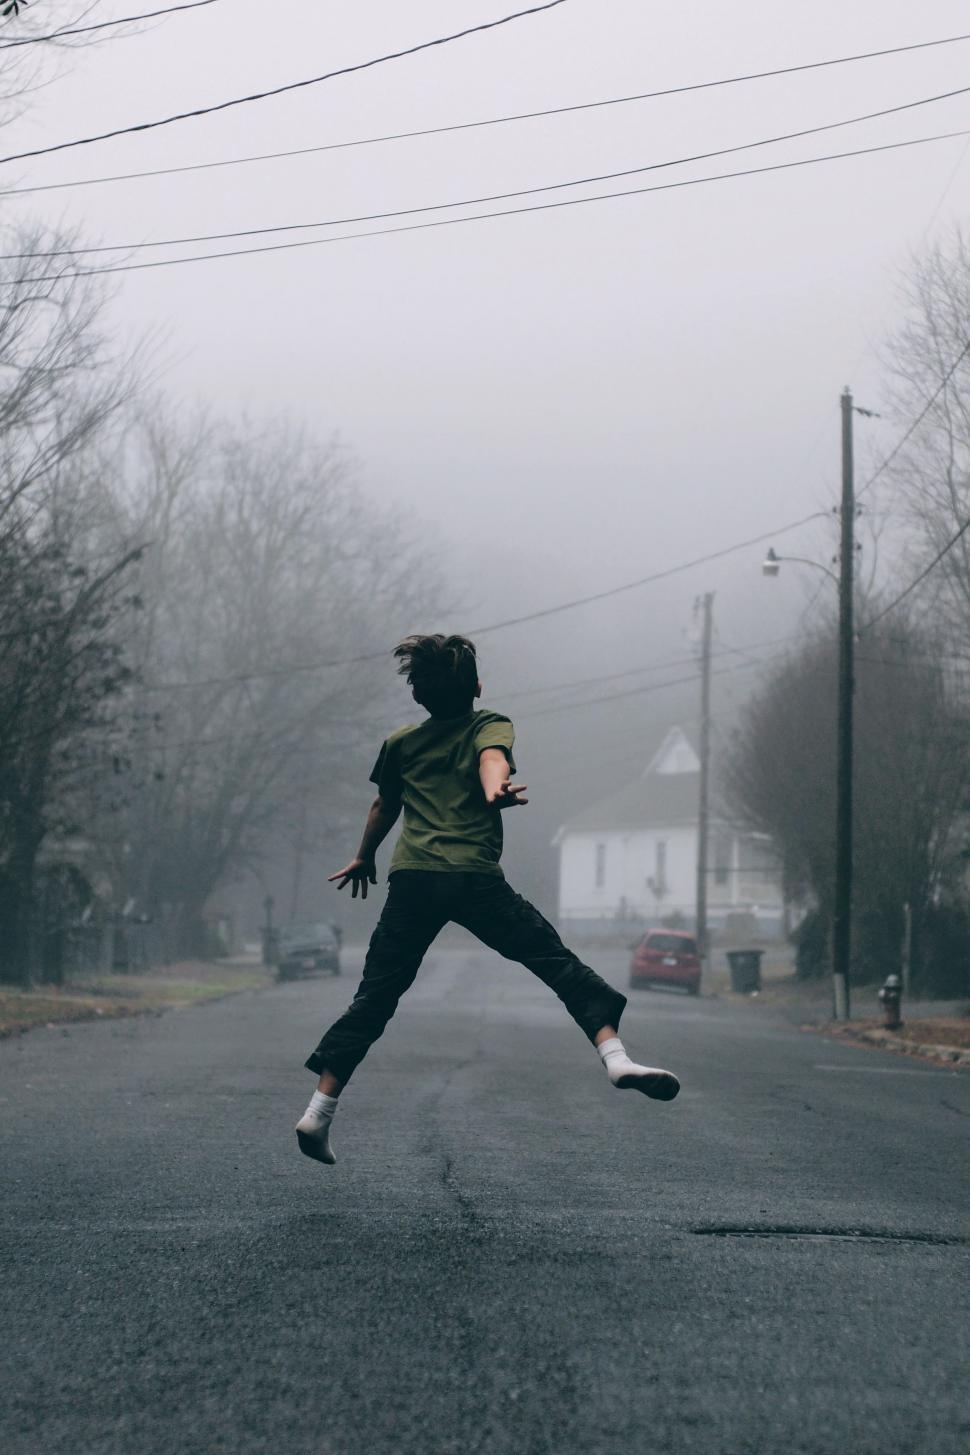 Free Image of Person Jumping in the Middle of a Street 